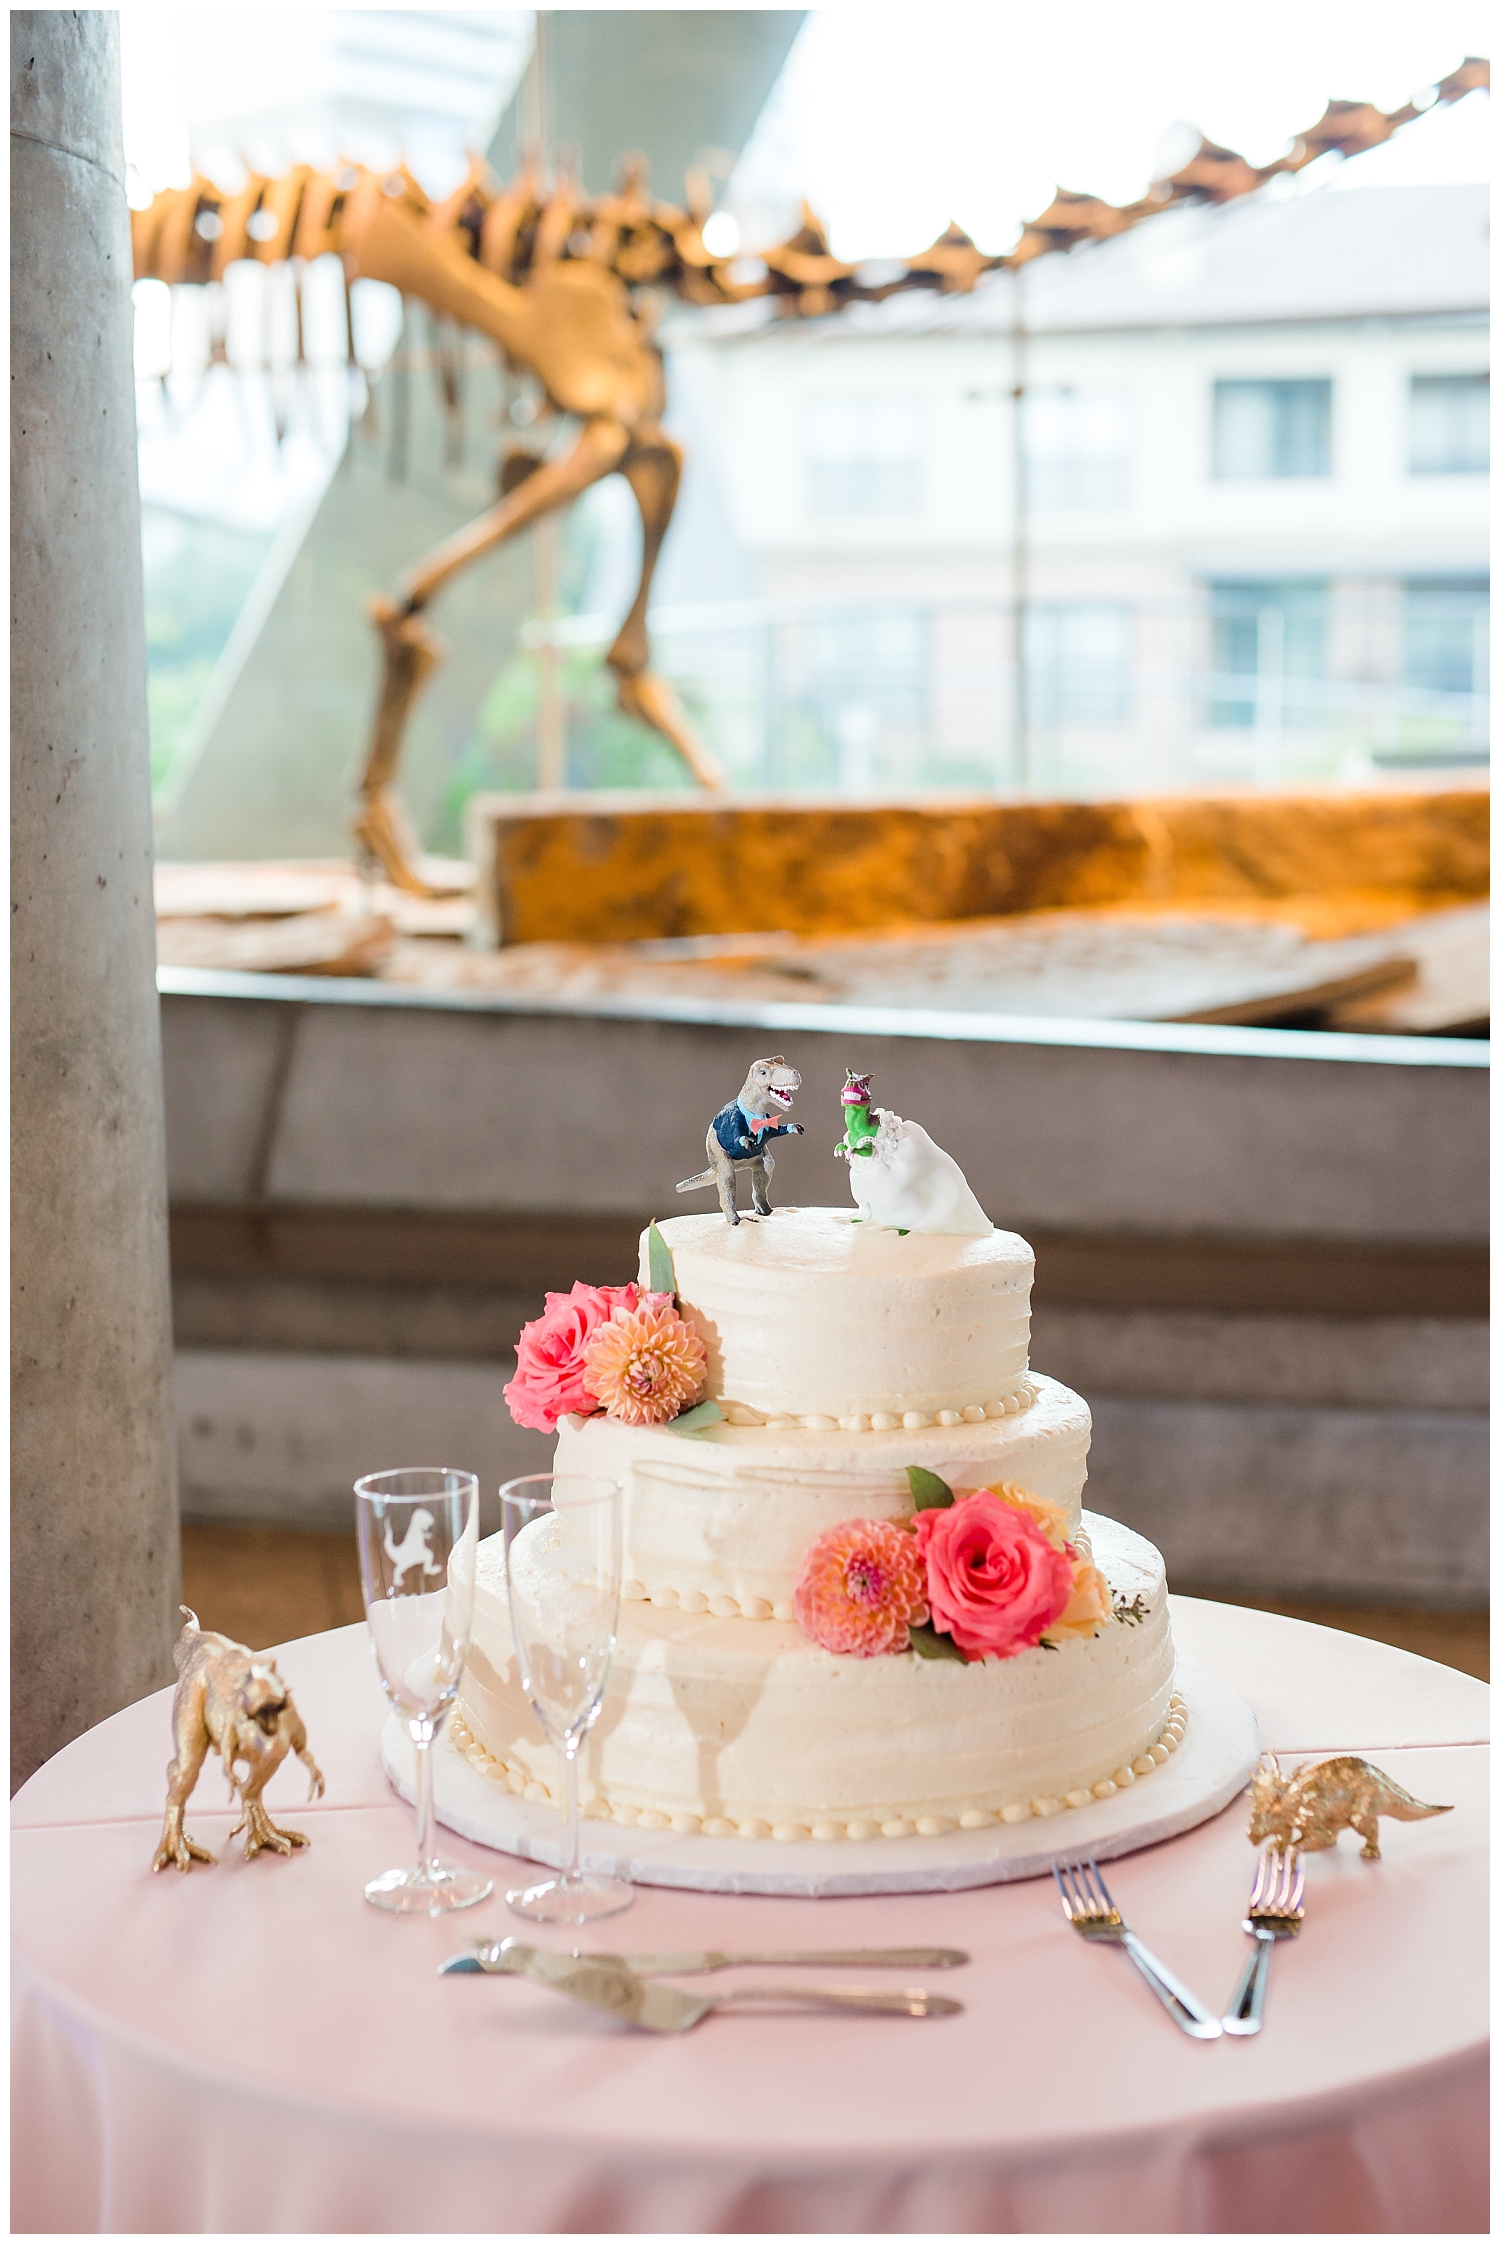 Wedding at the Perot Museum of Nature and Science